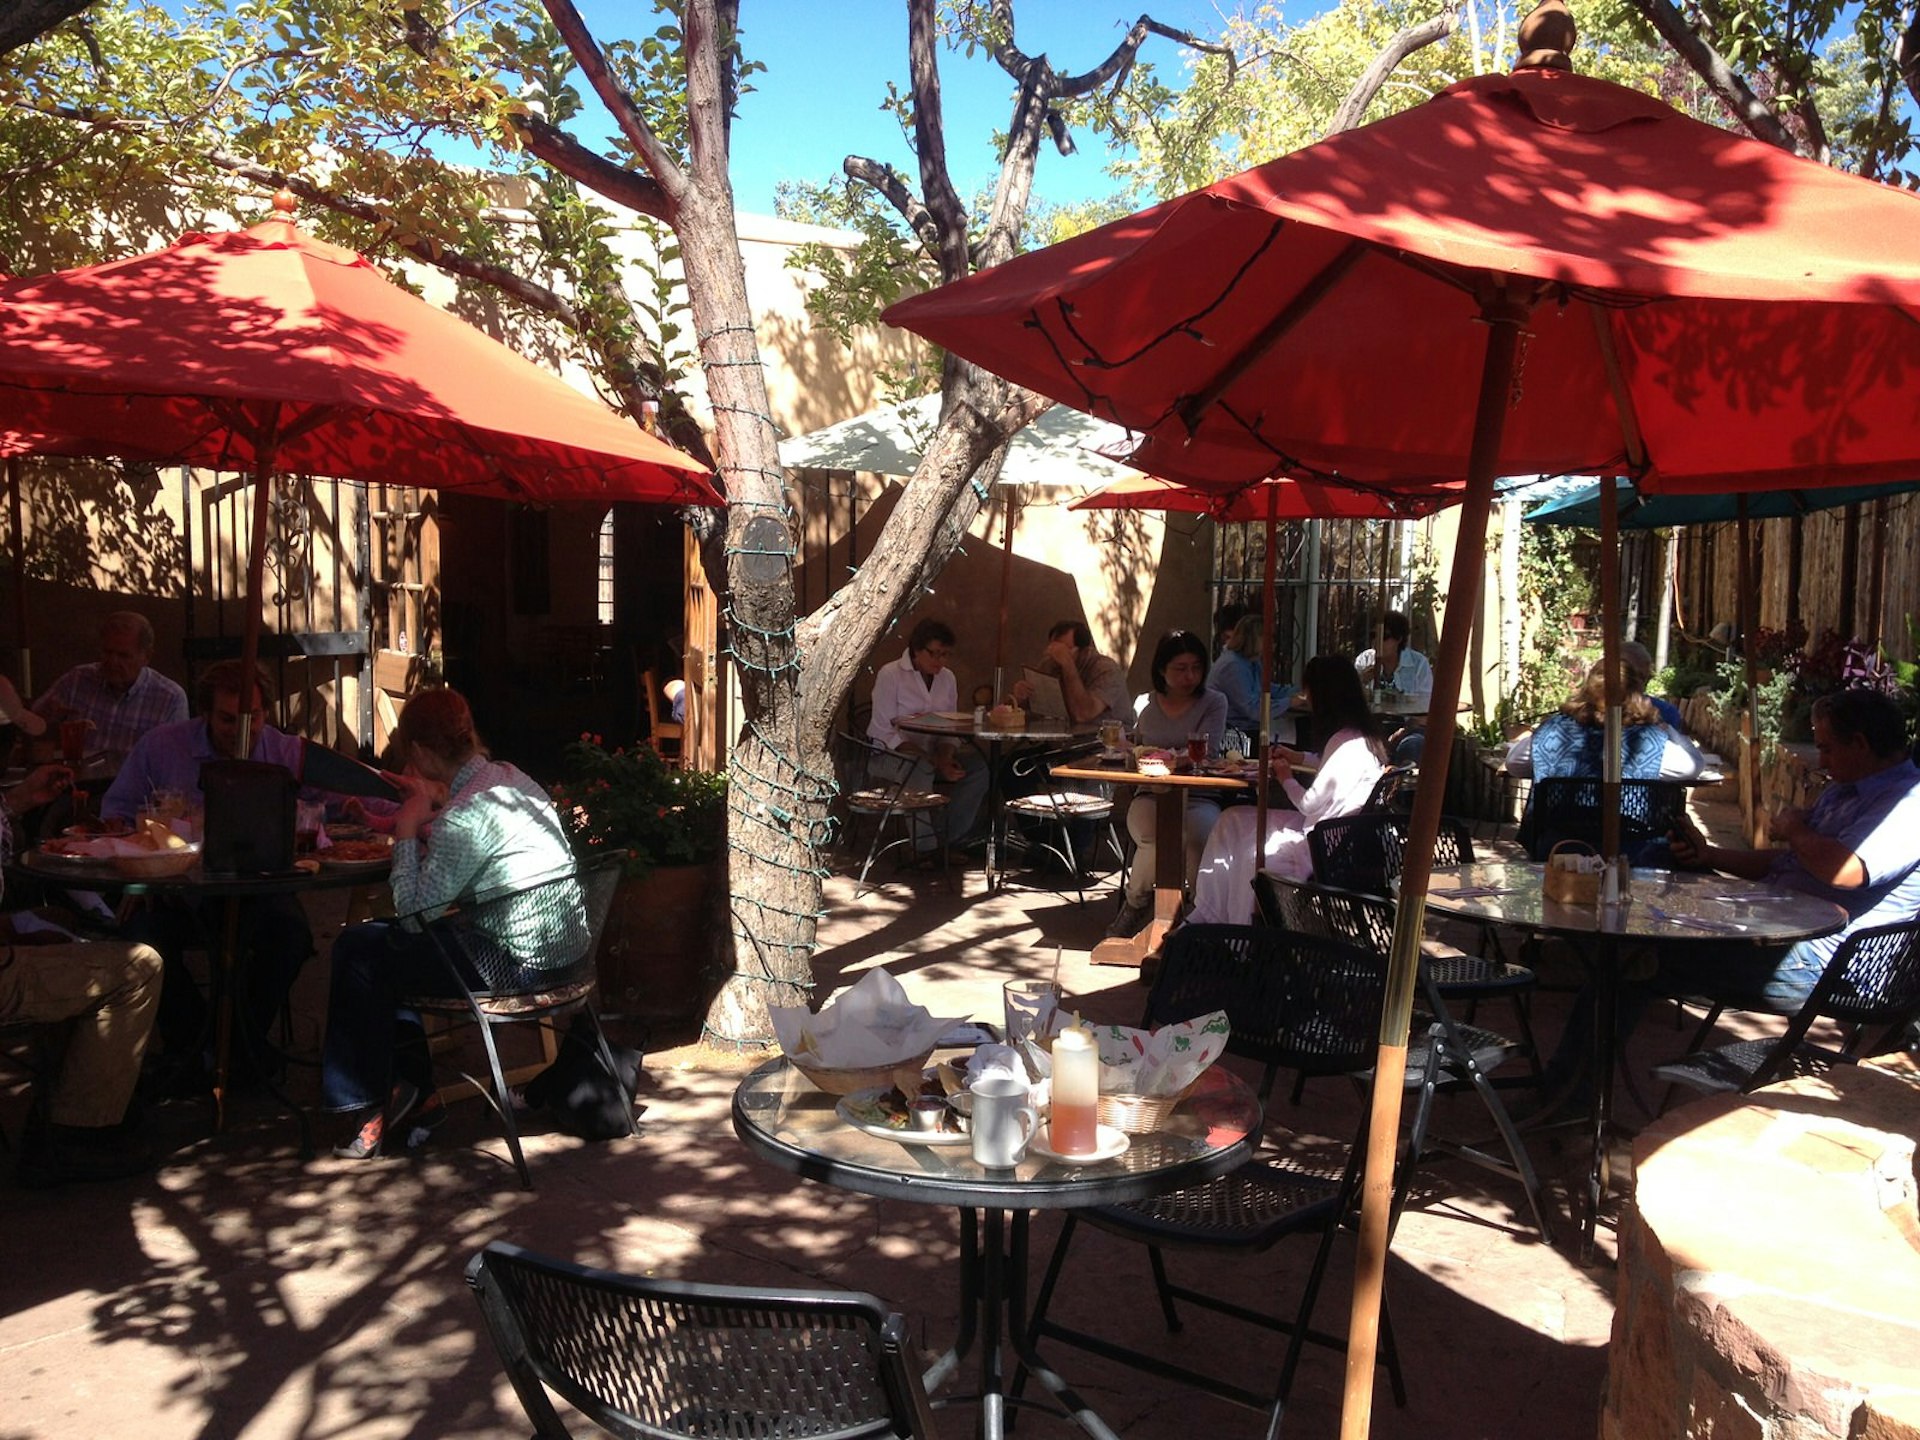 Diners at tables under shade of trees and some red umbrellas. Al fresco dining on the patio (picture: La Choza) is the perfect way to enjoy New Mexico's sunny weather © Megan Eaves / Lonely Planet